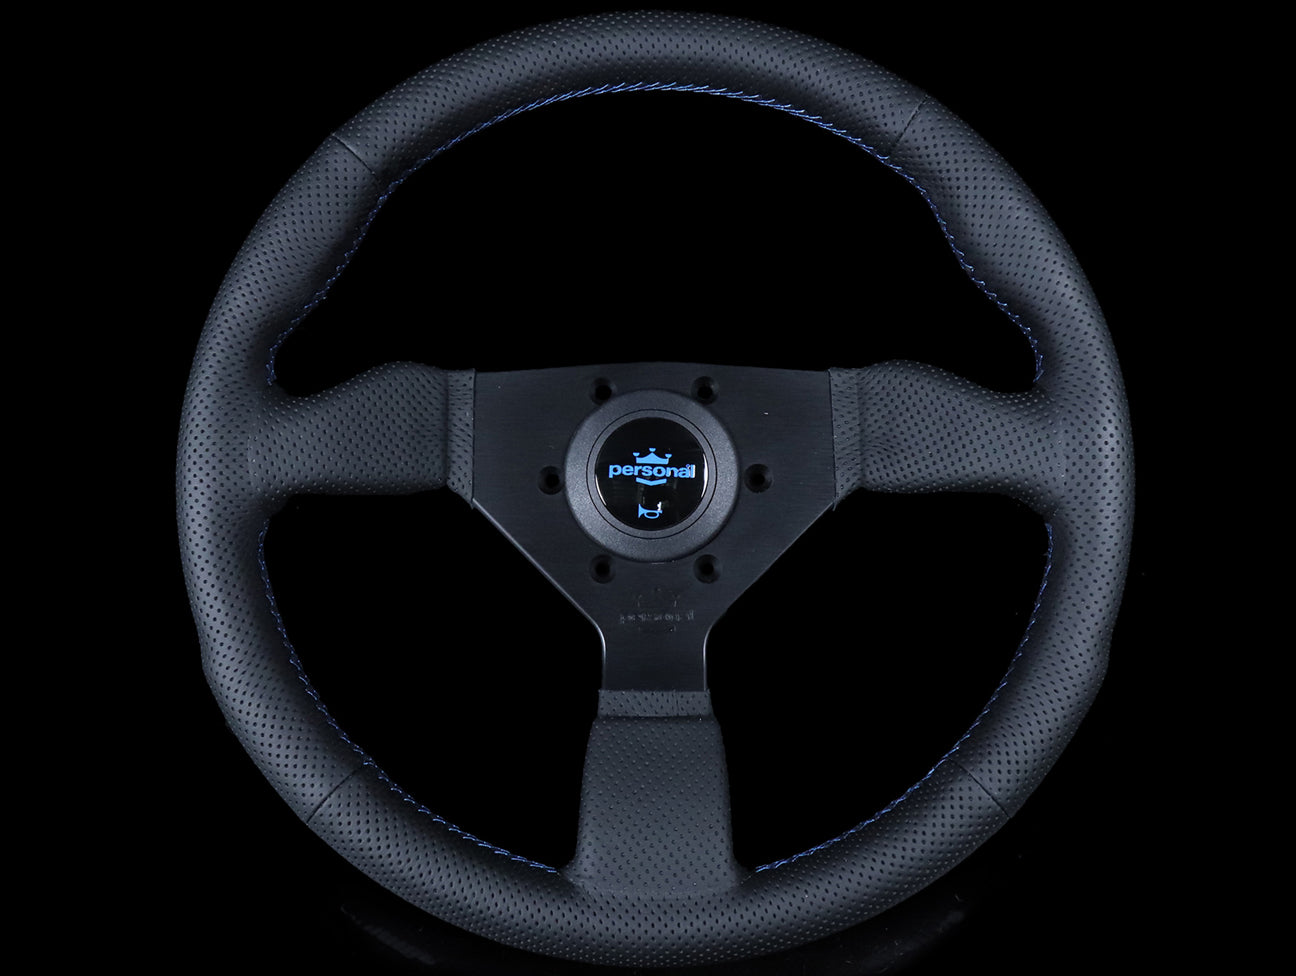 Personal Neo Grinta 330mm Steering Wheel - Perforated Leather / Blue Stitch